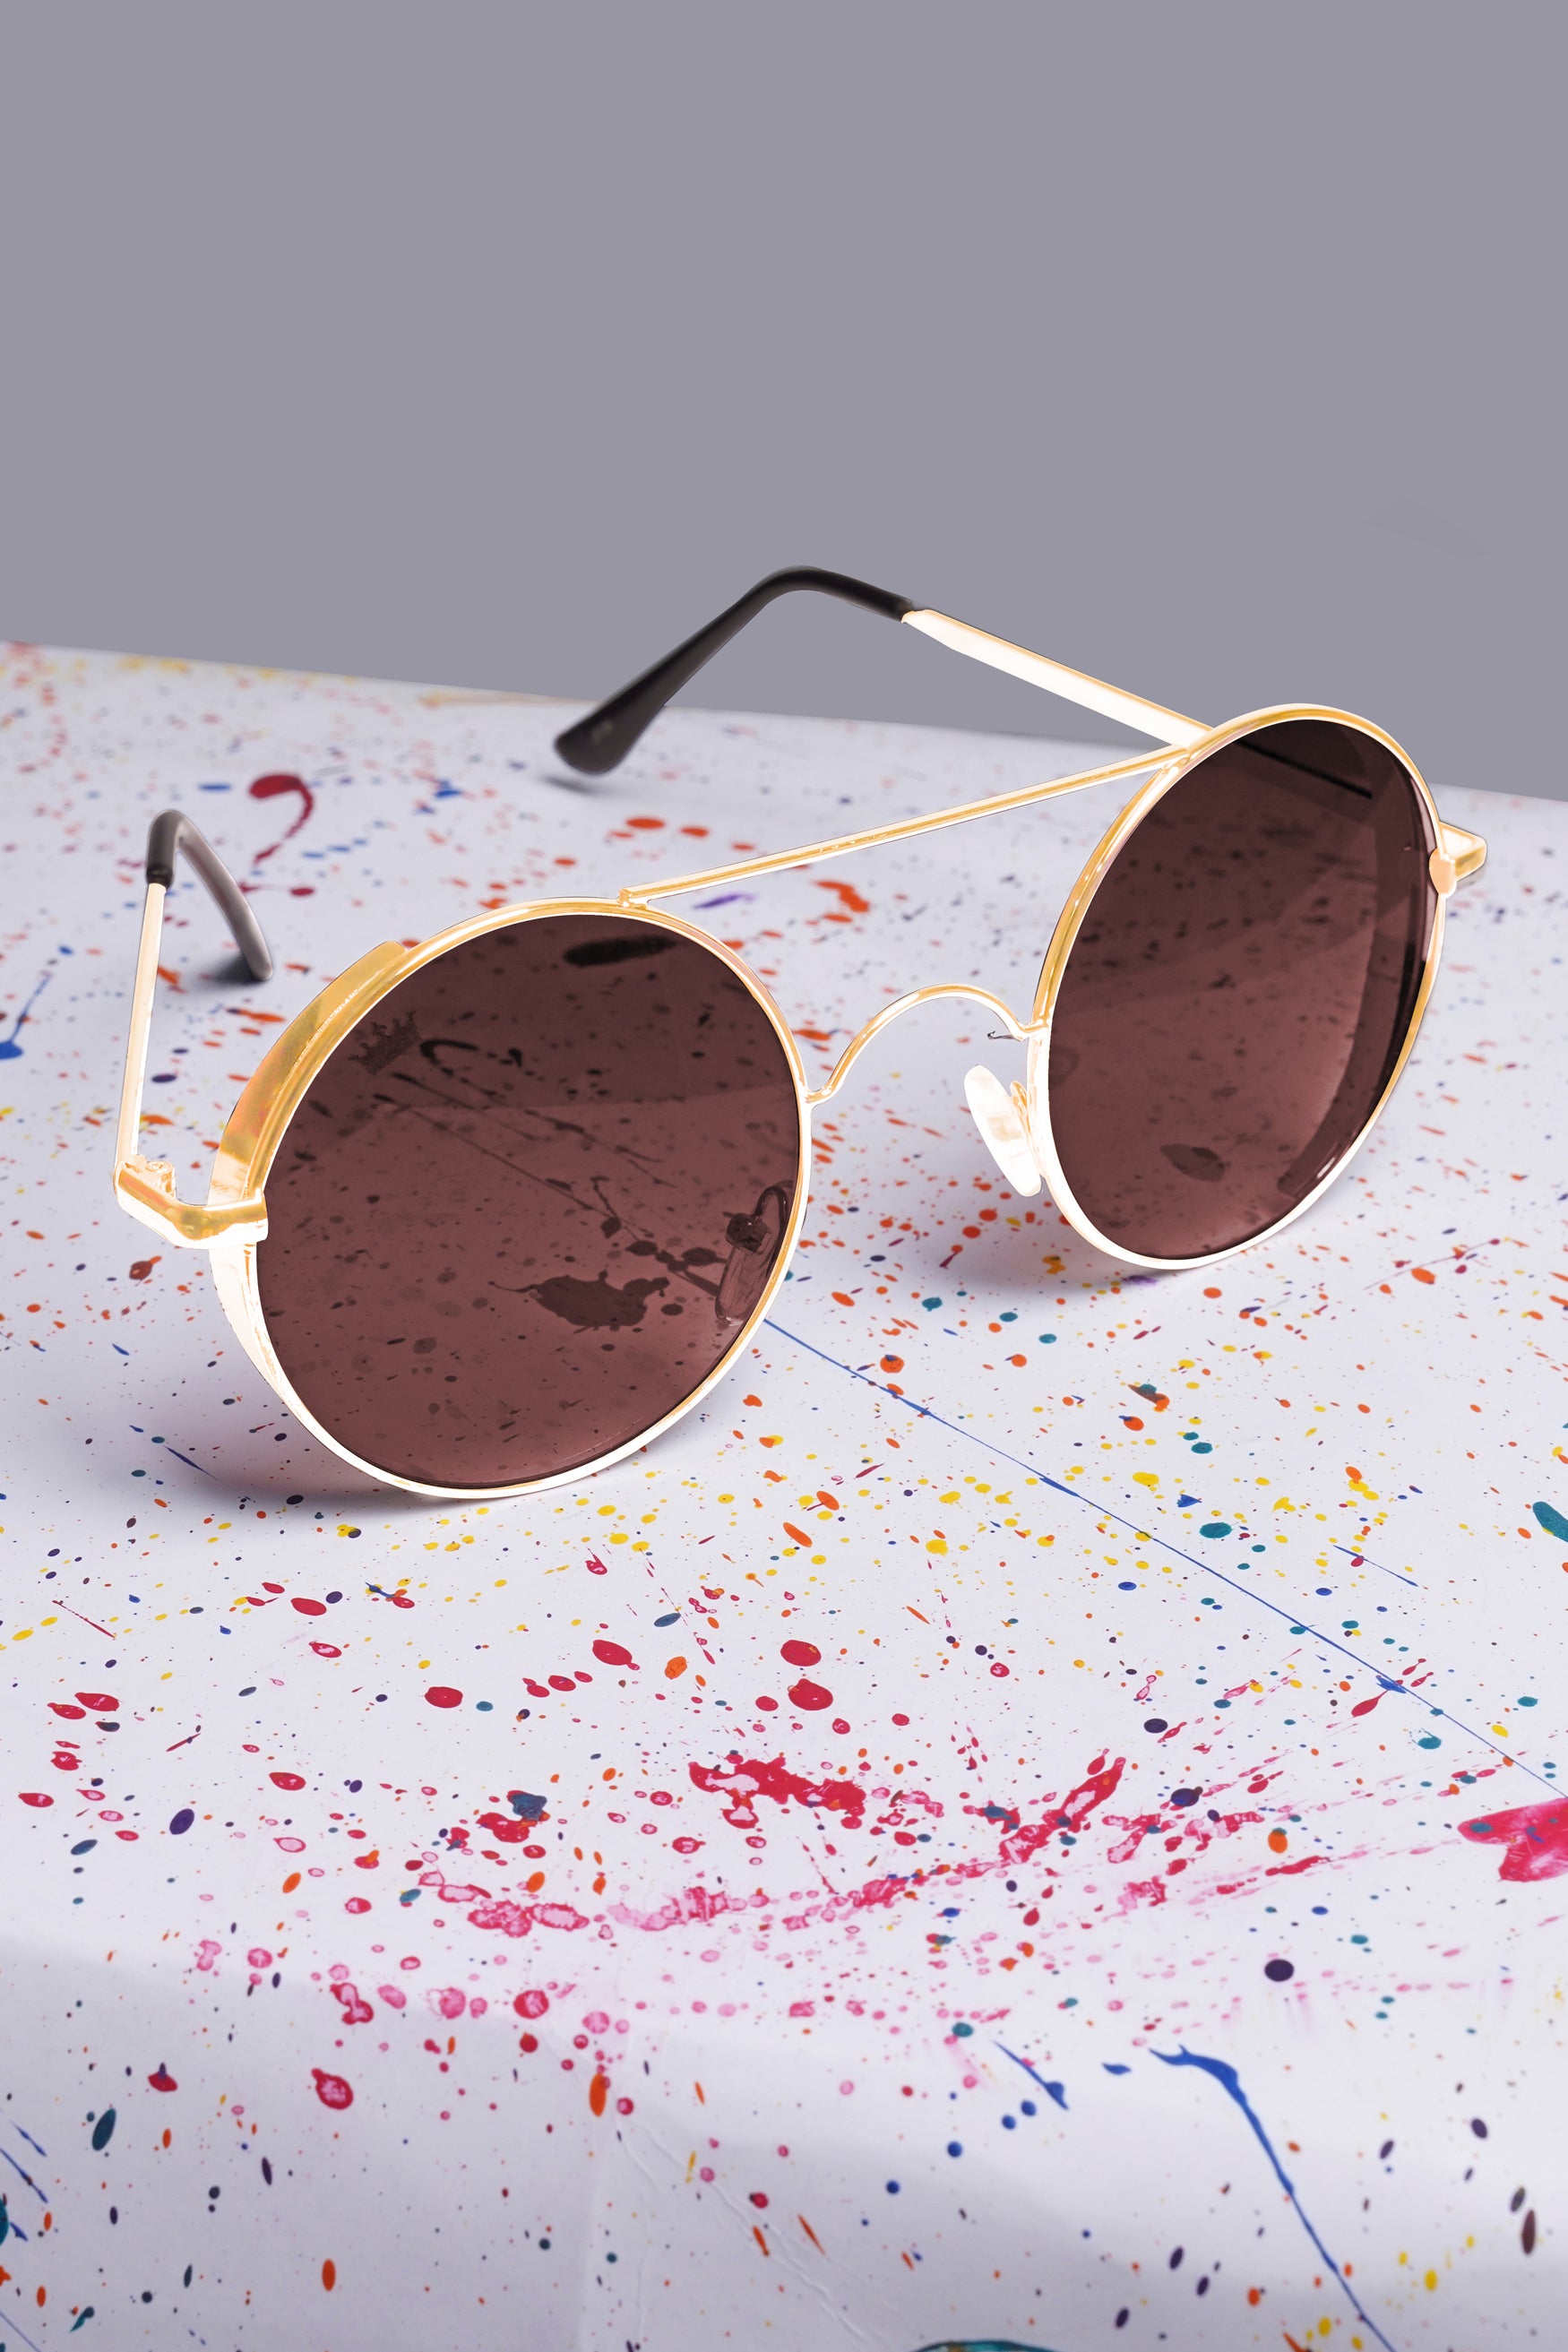 Hickory Brown French Crown Round-Shaped Unisex Sunglasses